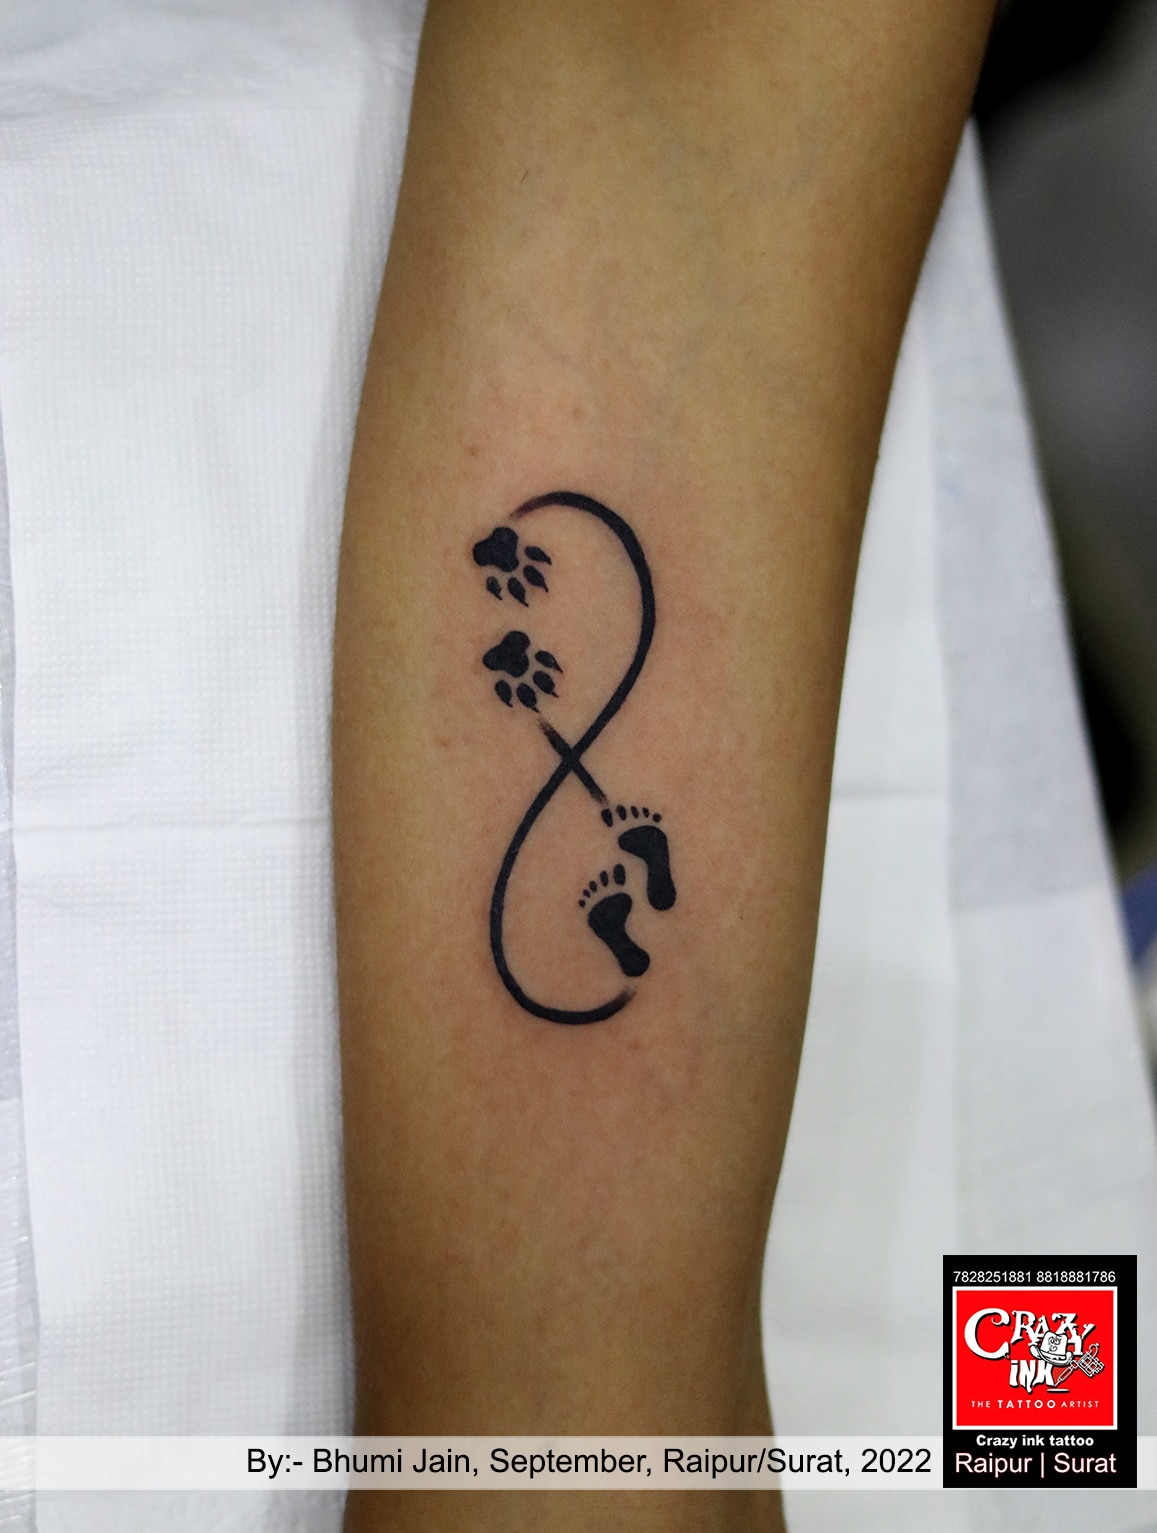 Infinity symbol tattoo done in white ink, located on